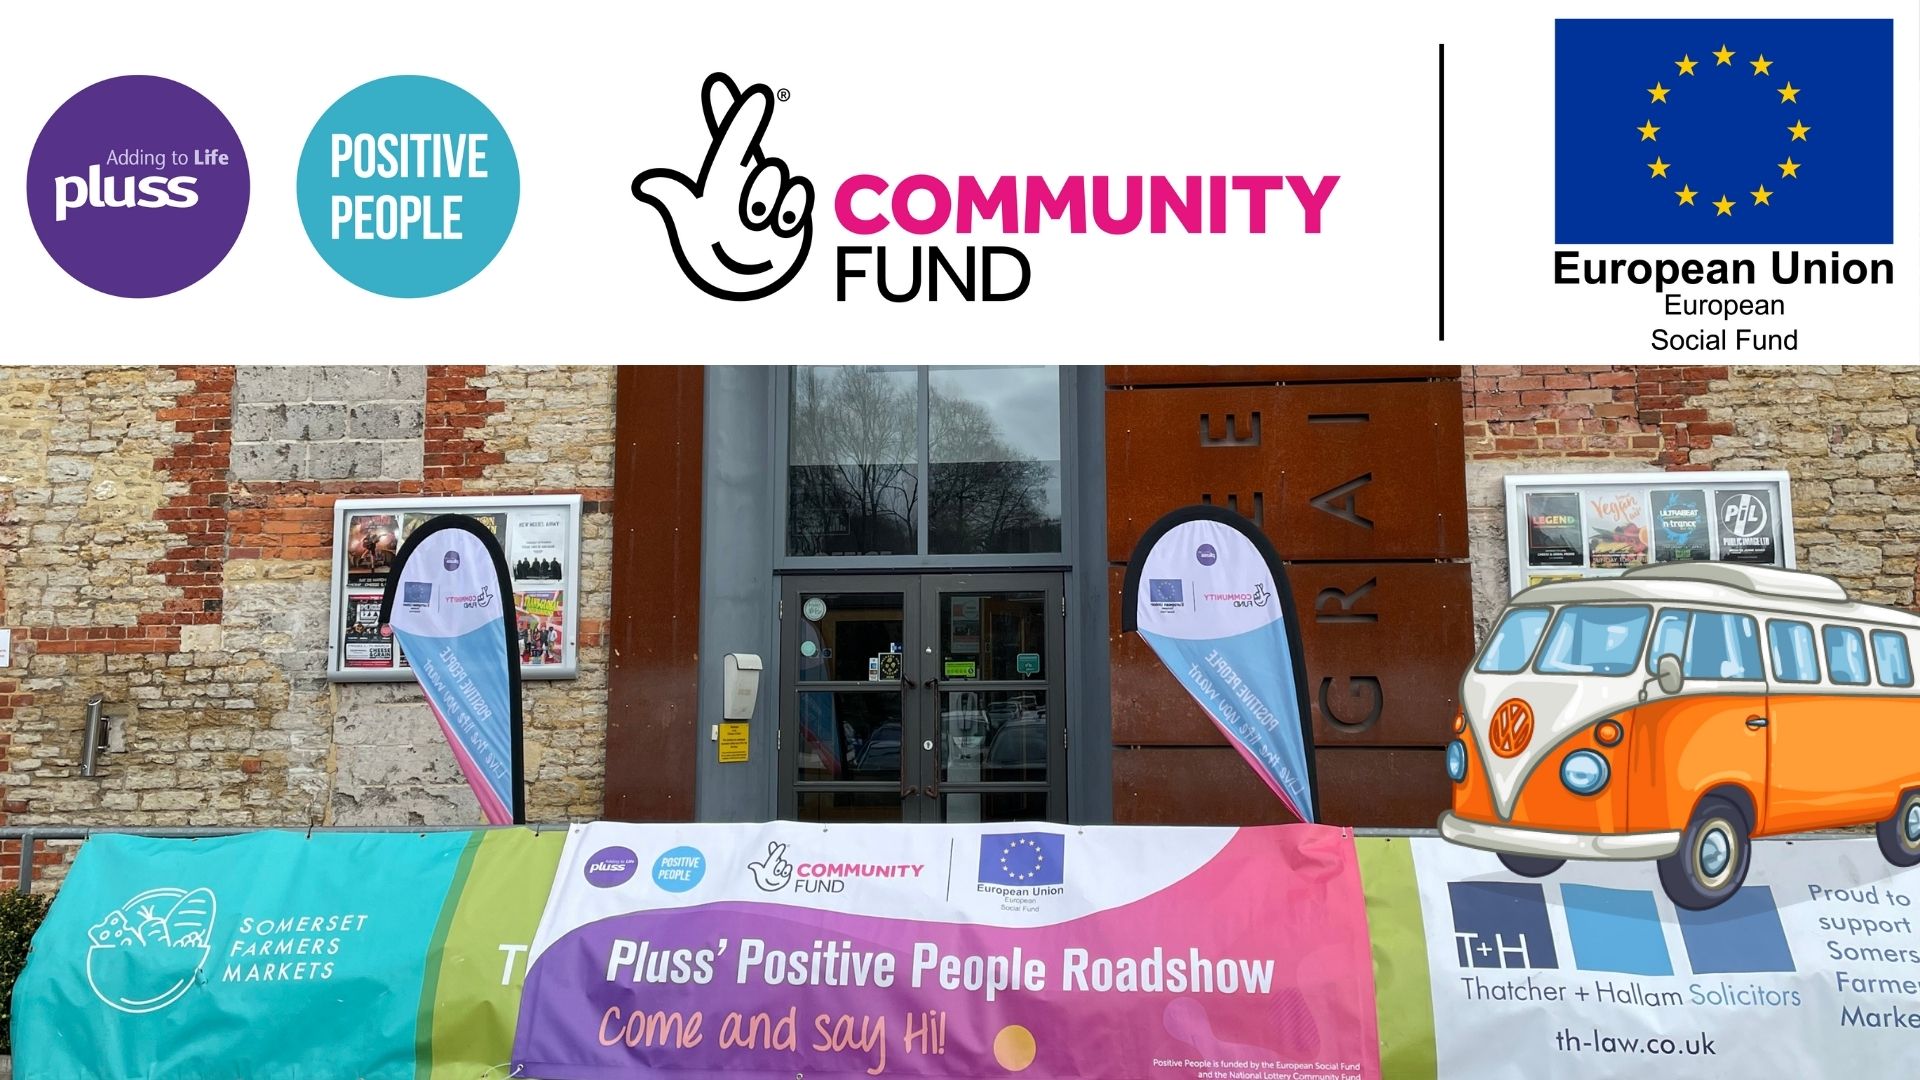 Positive People Roadshow in Frome, Somerset